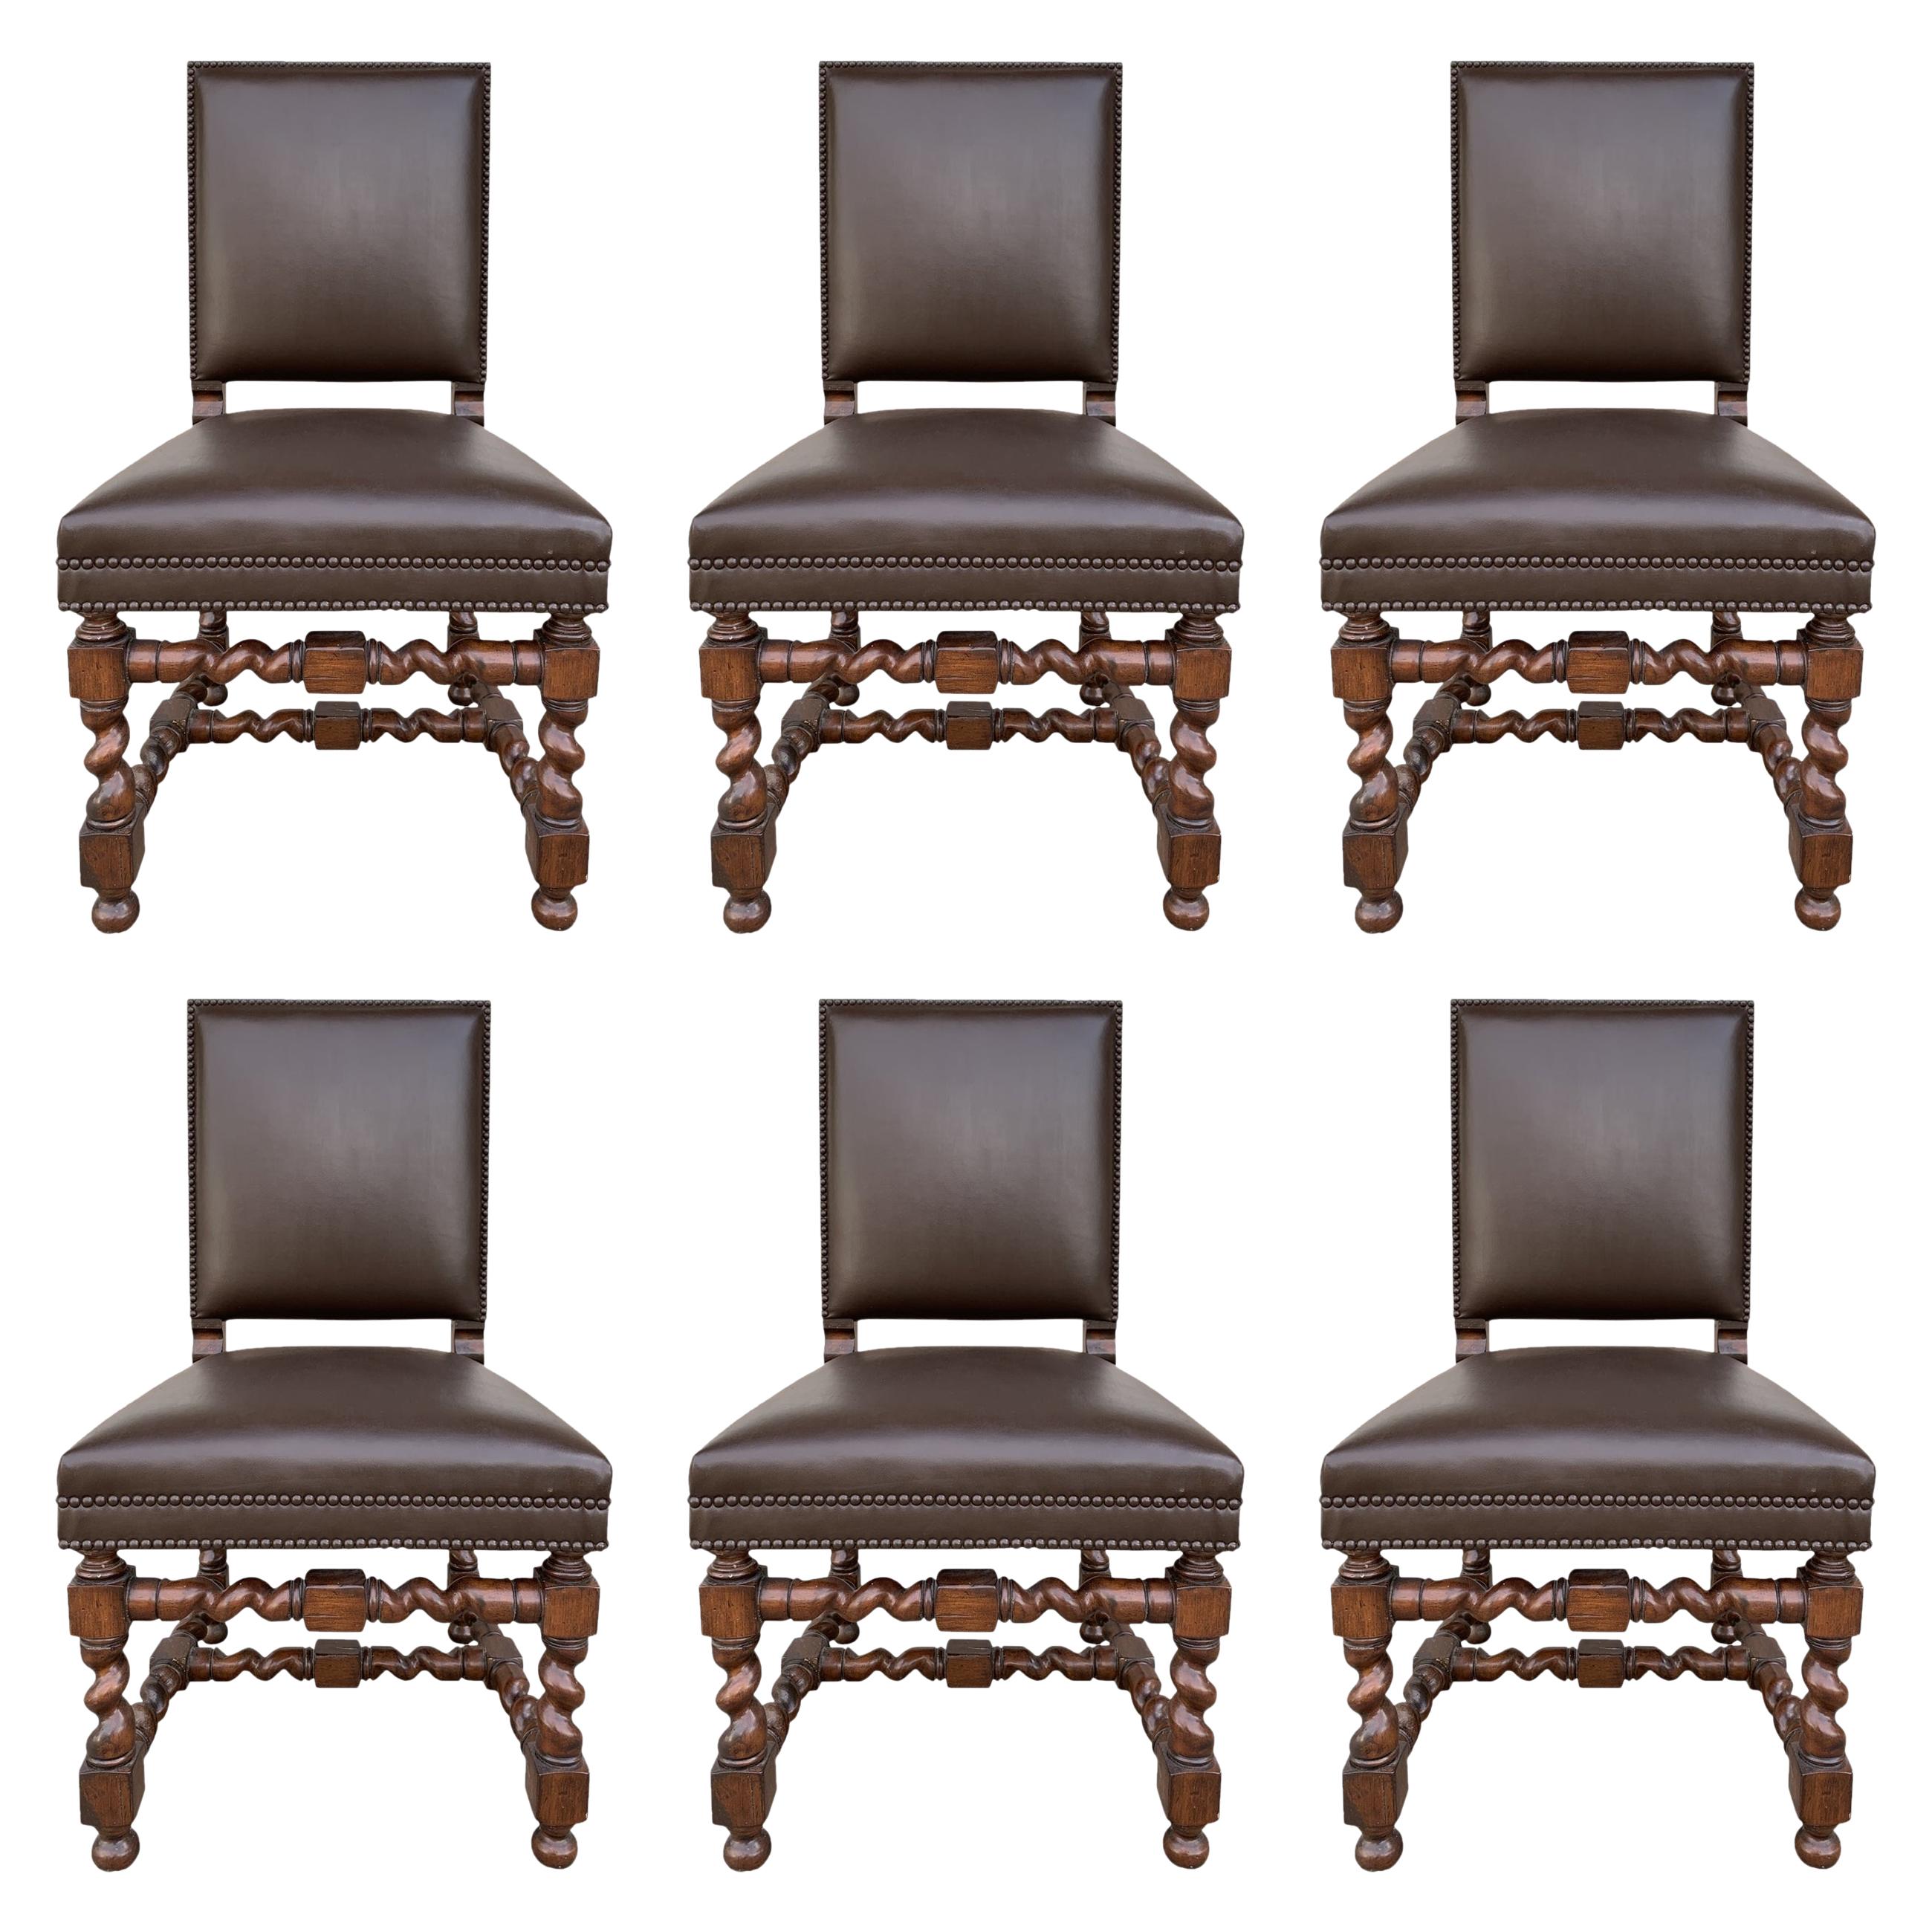 Set of 6 Vintage Chairs with Turned Legs and Leather Upholstery